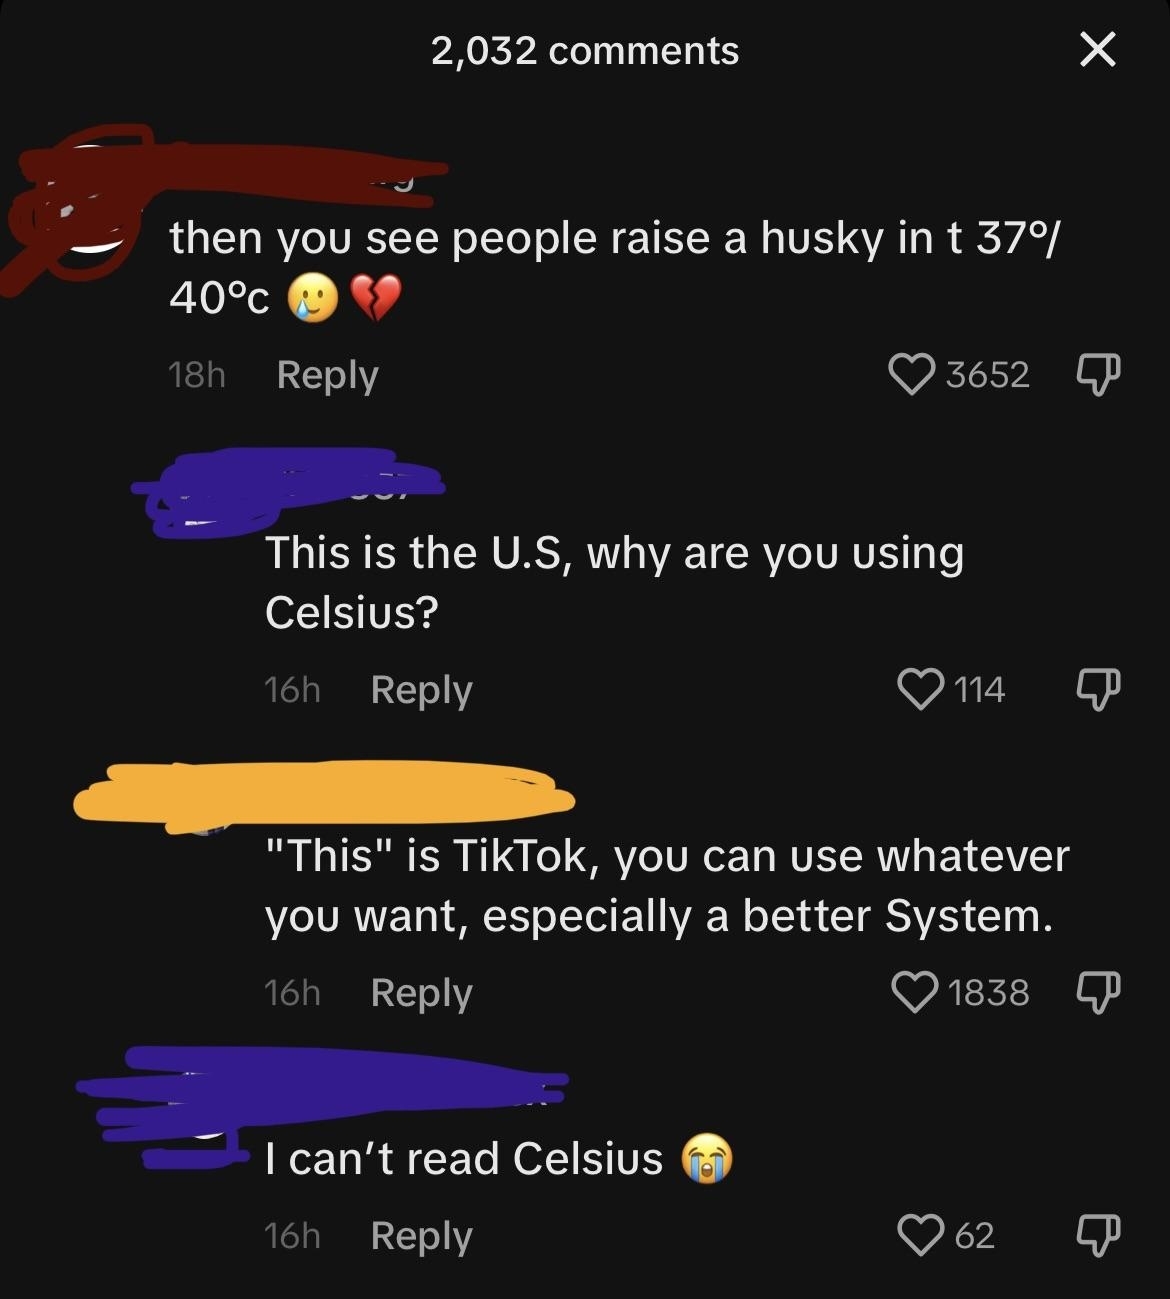 &quot;Then you see people raise a husky in t 37/40 degrees Celsius,&quot; &quot;This is the US, why are you using Celsius?&quot; &quot;&#x27;This&#x27; is TikTok, you can use whatever you want, especially a better system,&quot; and &quot;I can&#x27;t read Celsius&quot;